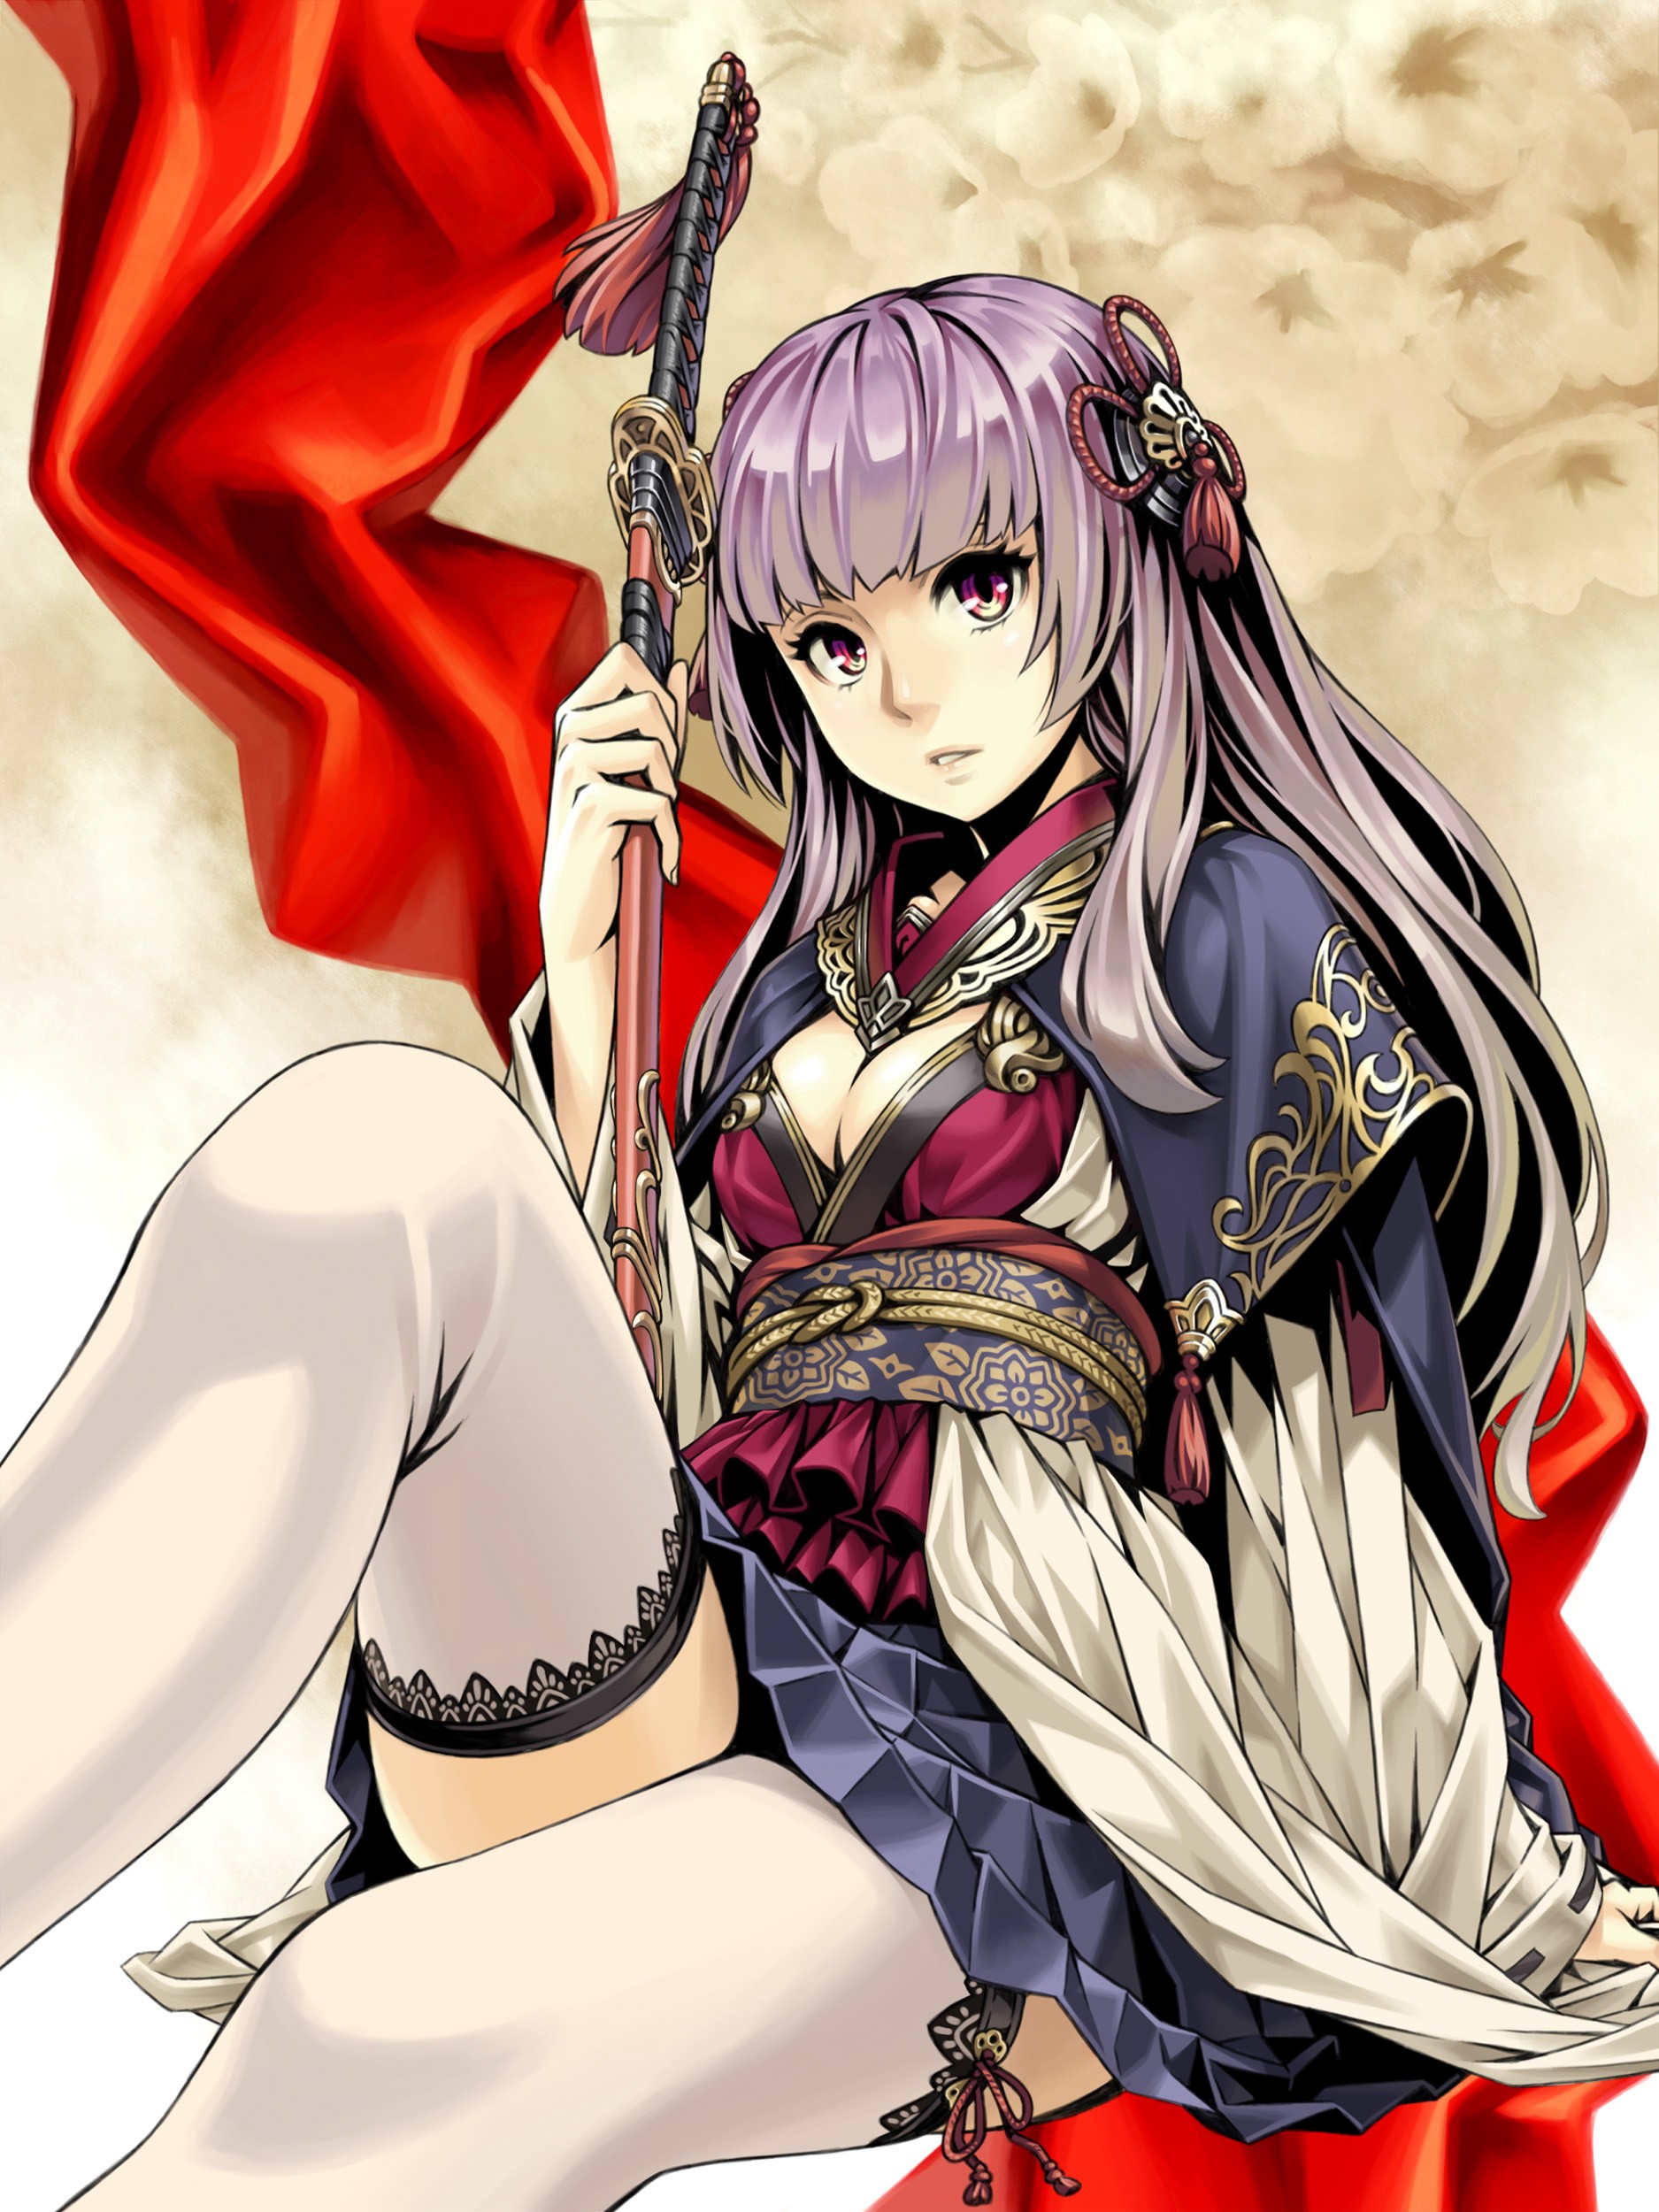 Anime 1875x2500 anime anime girls cleavage Japanese clothes sword weapon original characters Pixiv stockings white stockings thighs women with swords fantasy art fantasy girl purple hair sitting